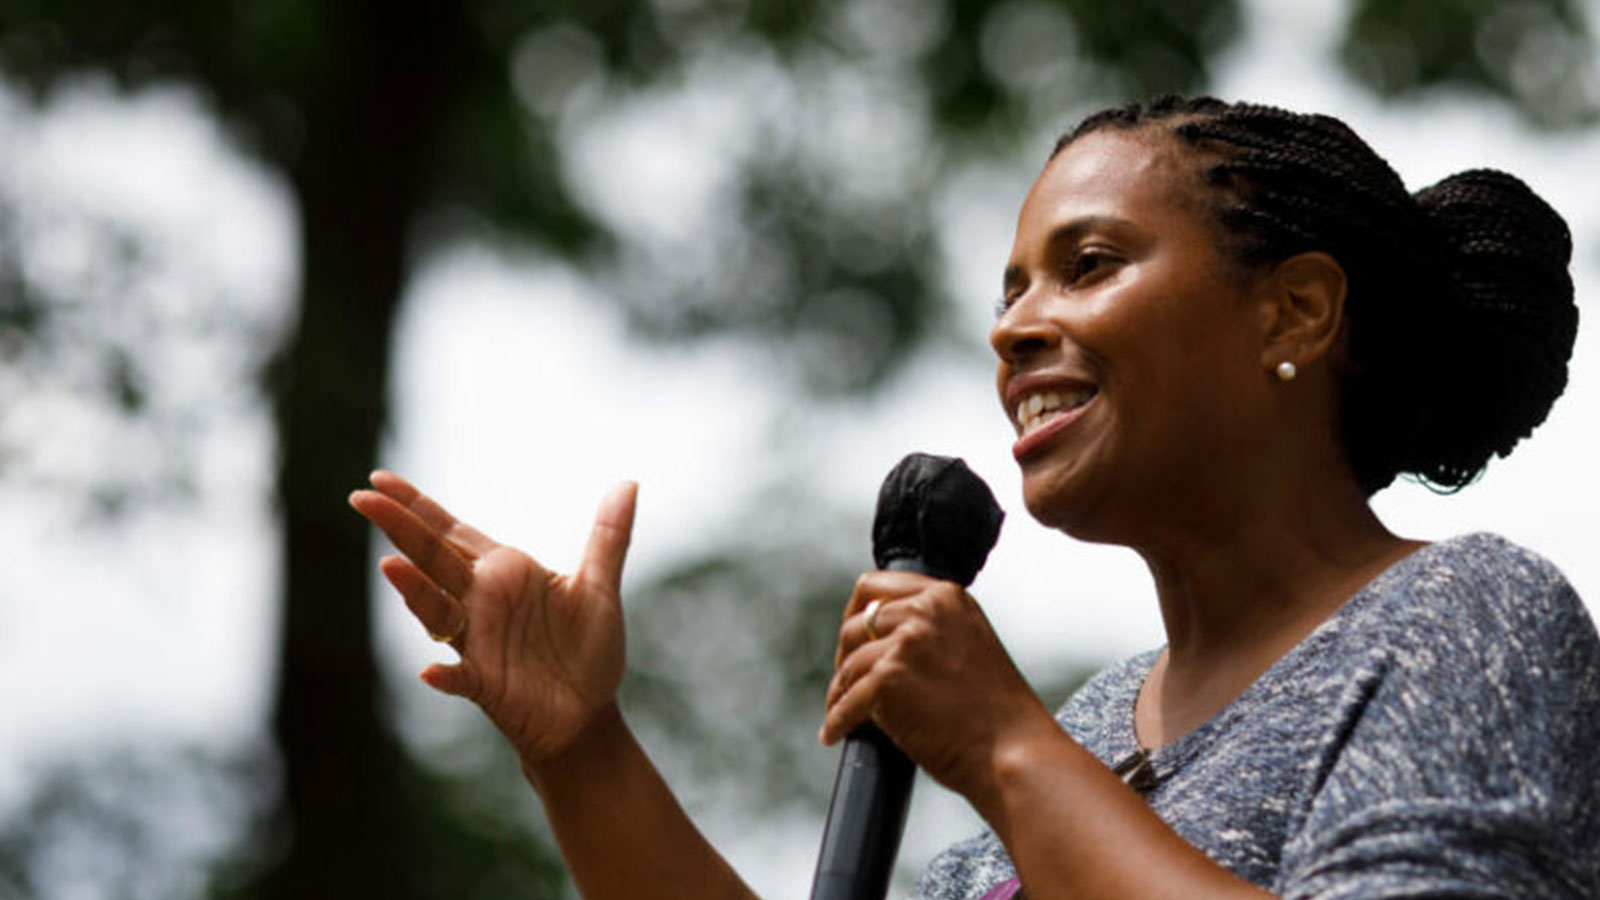 Tanisha Sullivan, president of Boston's NAACP chapter, speaks at a closing awards ceremony after July's Negro Election Day parade in Salem, MA.